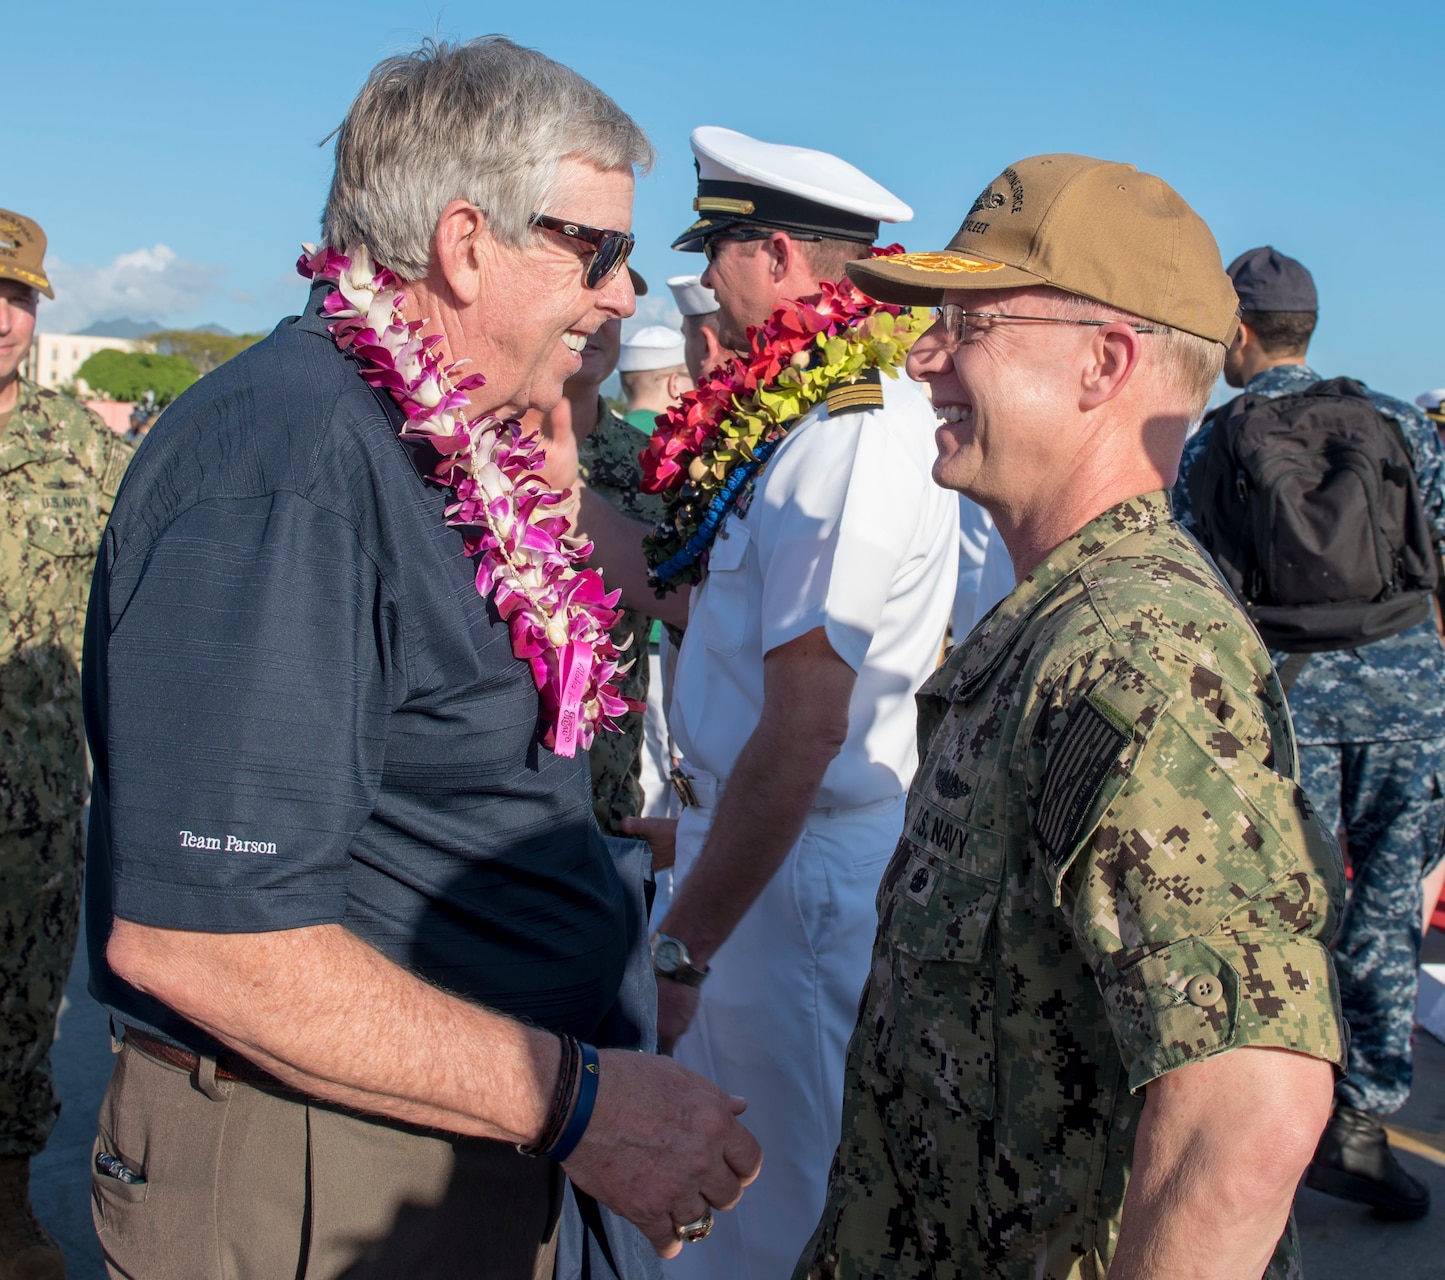 180126-N-KV911-0166 PEARL HARBOR (Jan. 26, 2018) Missouri Lieutenant Governor Michael L. Parson speaks with Rear Adm. Daryl Caudle, commander, Submarine Force, U.S. Pacific Fleet following the Virginia-class fast-attack submarine USS Missouri (SSN 780) arrival at Joint Base Pearl Harbor-Hickam following a change of homeport from Groton, Connecticut, Jan. 26. USS Missouri is the 6th Virginia-class submarine homeported in Pearl Harbor. (U.S. Navy Photo by Mass Communication Specialist 2nd Class Shaun Griffin/Released)